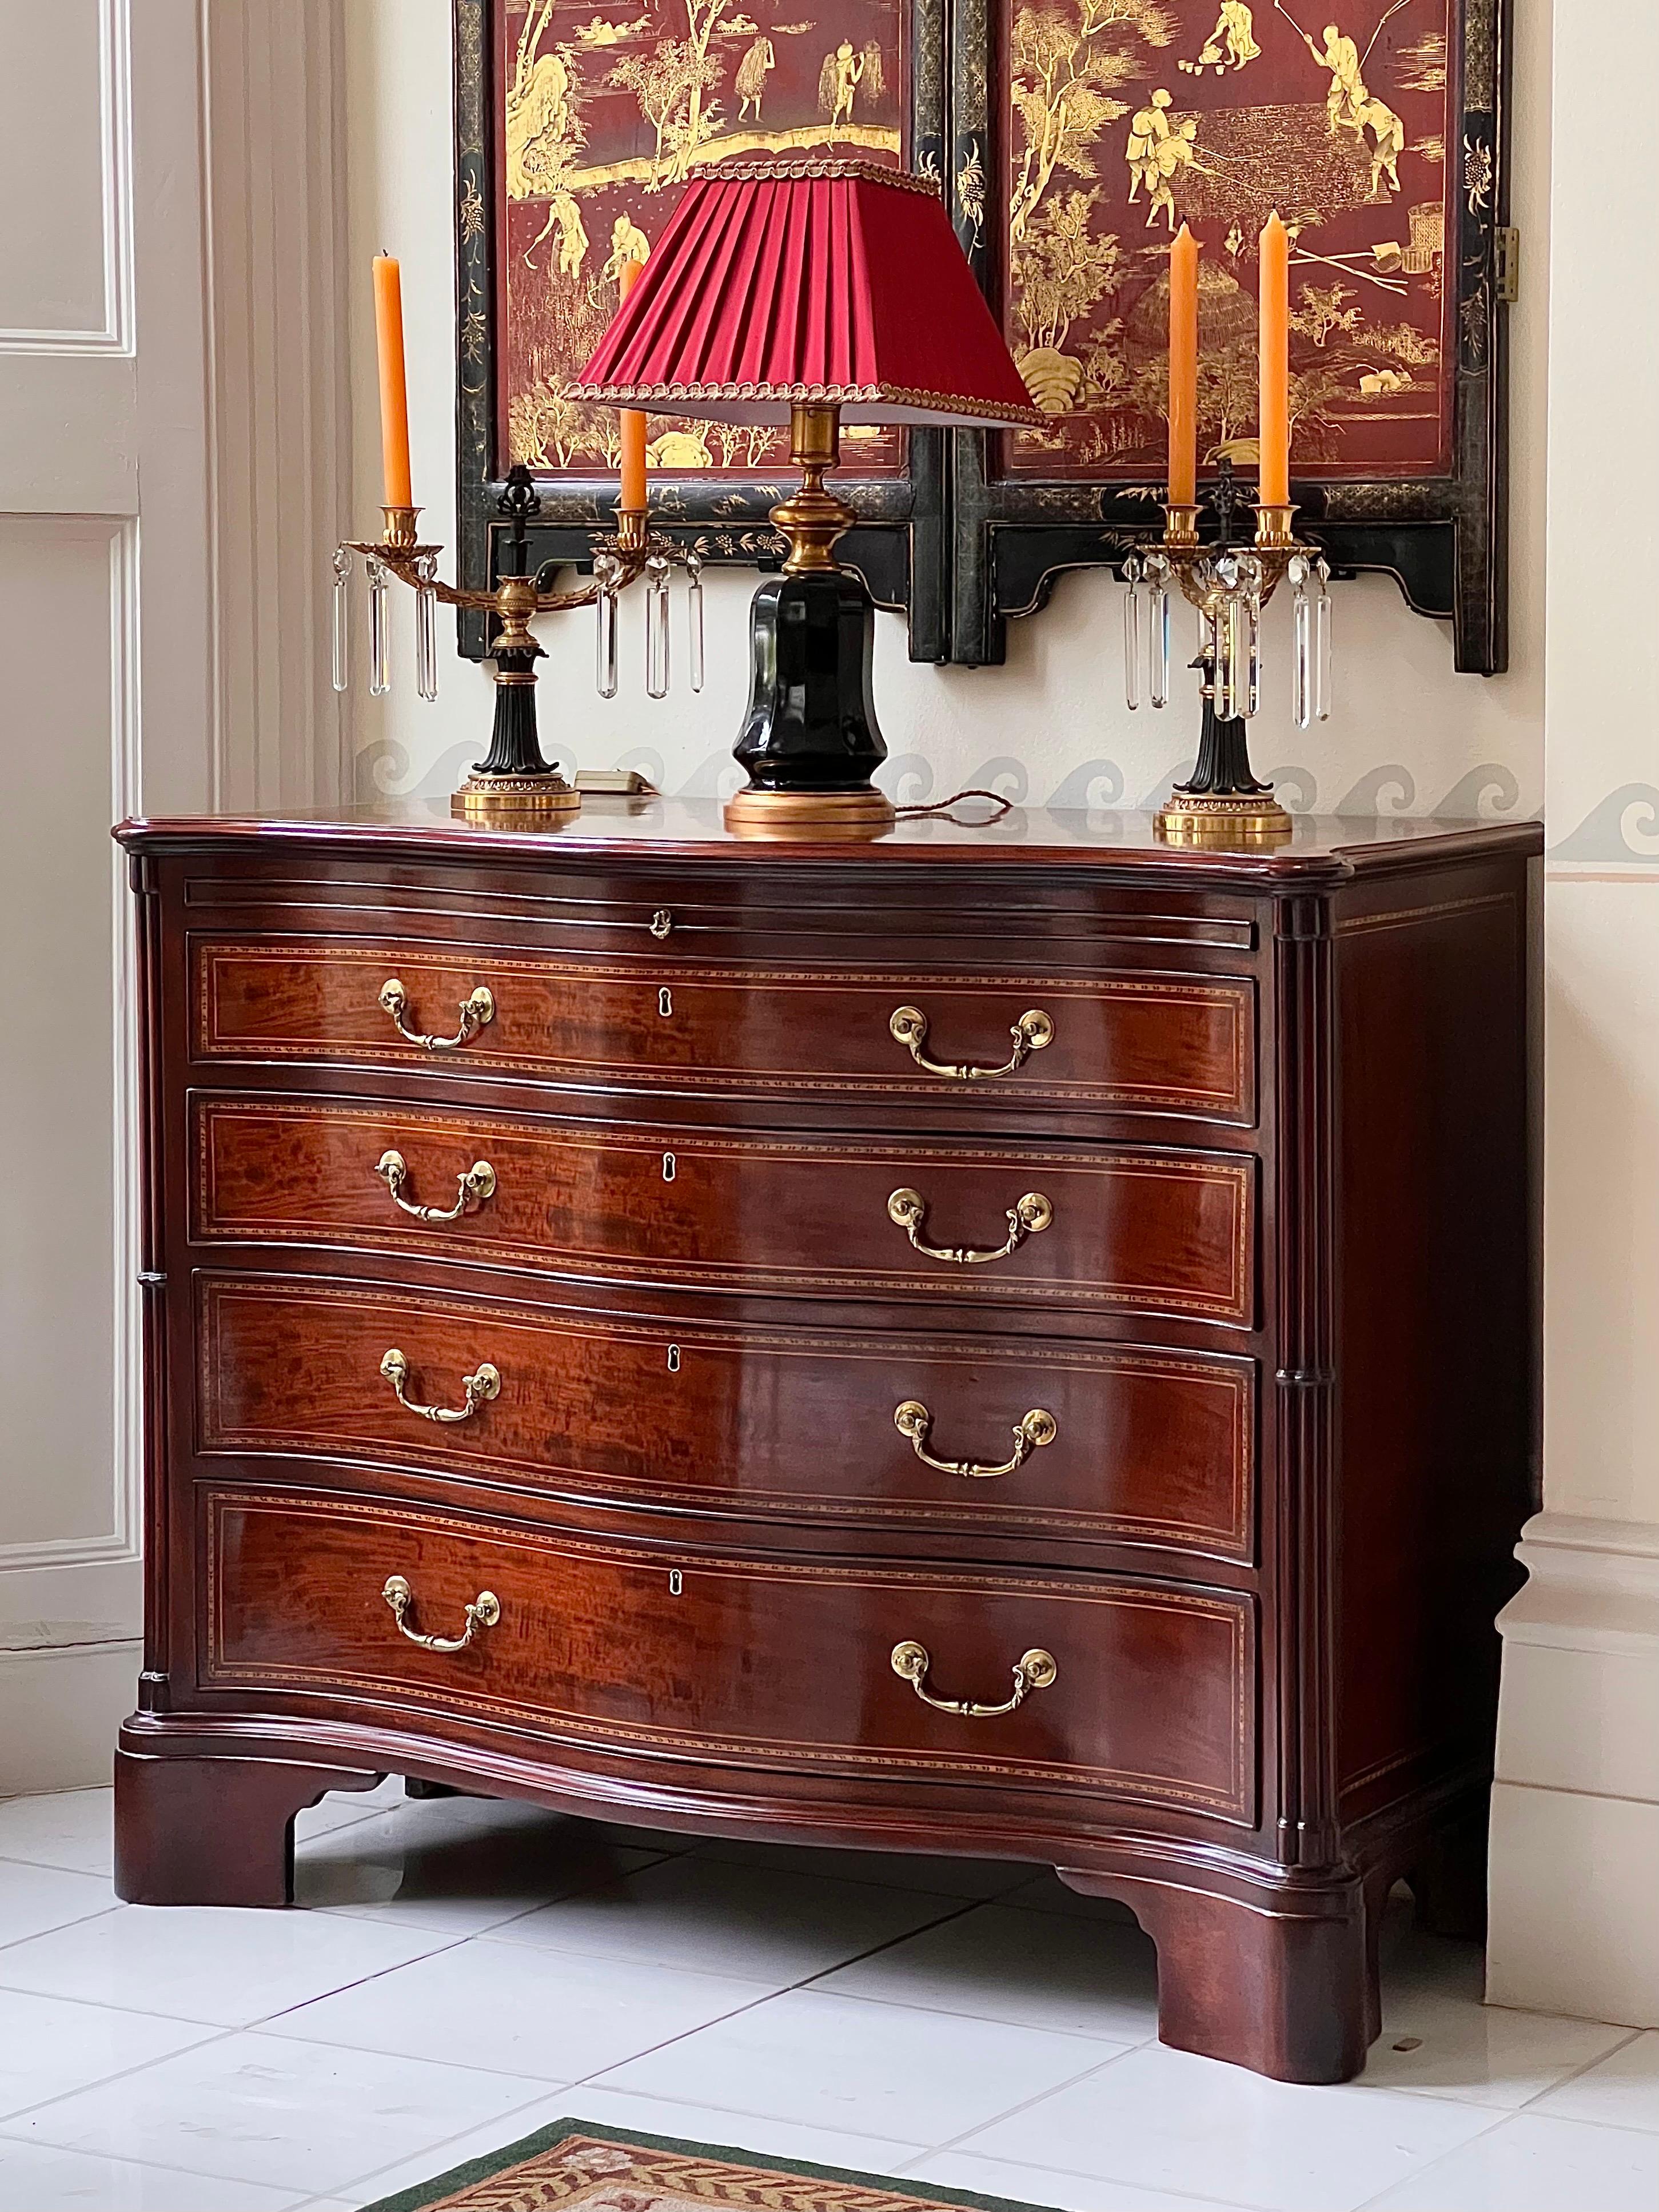 A superb quality George III Chippendale period serpentine-fronted chest of drawers.
English, c. 1770.

Why we like it
A most perfect embodiment of the Chippendale taste: superb quality, dramatically figured veneers and subtle decoration throughout.